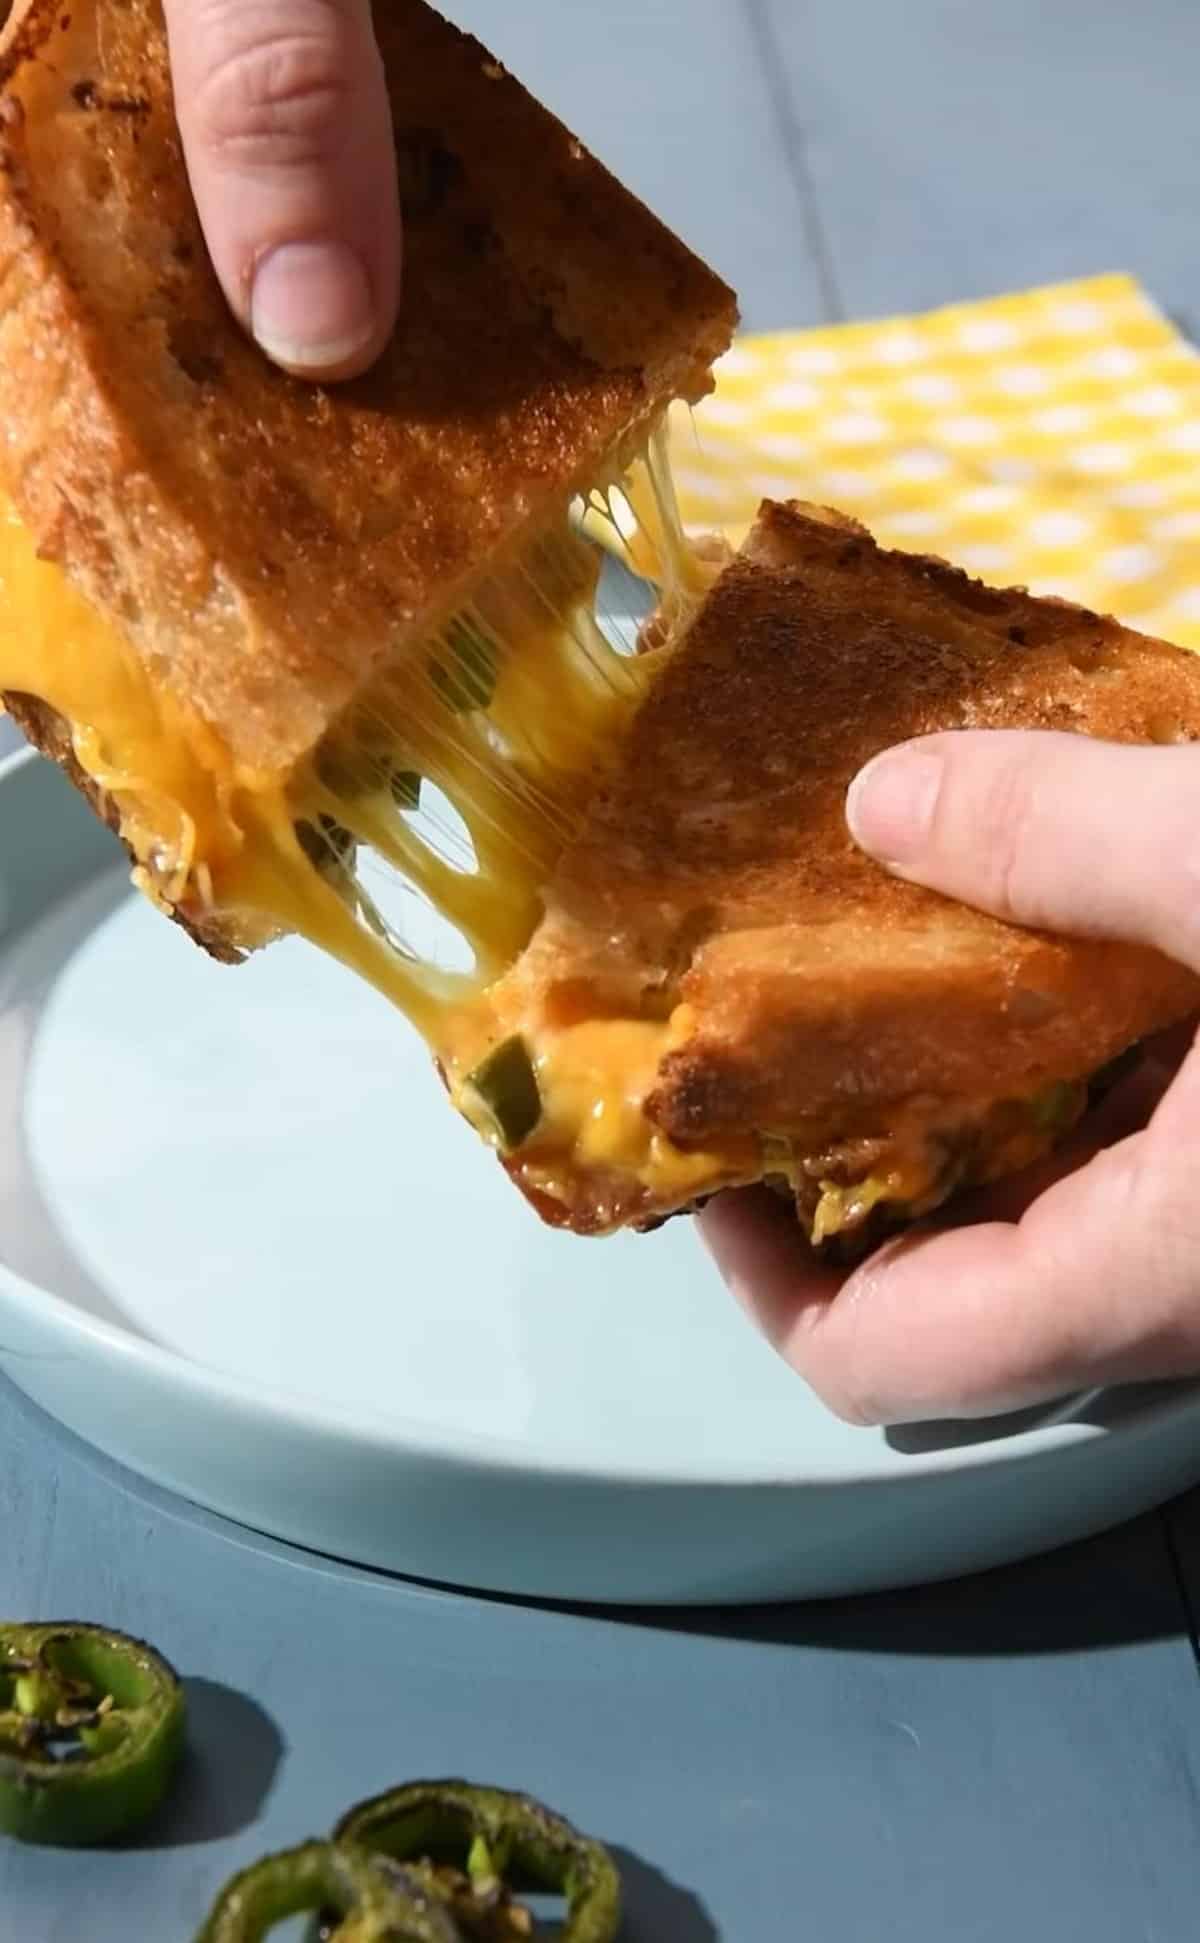 A vegan cheddar jalapeno popper sandwich made with Follow Your Heart brand vegan cheese.